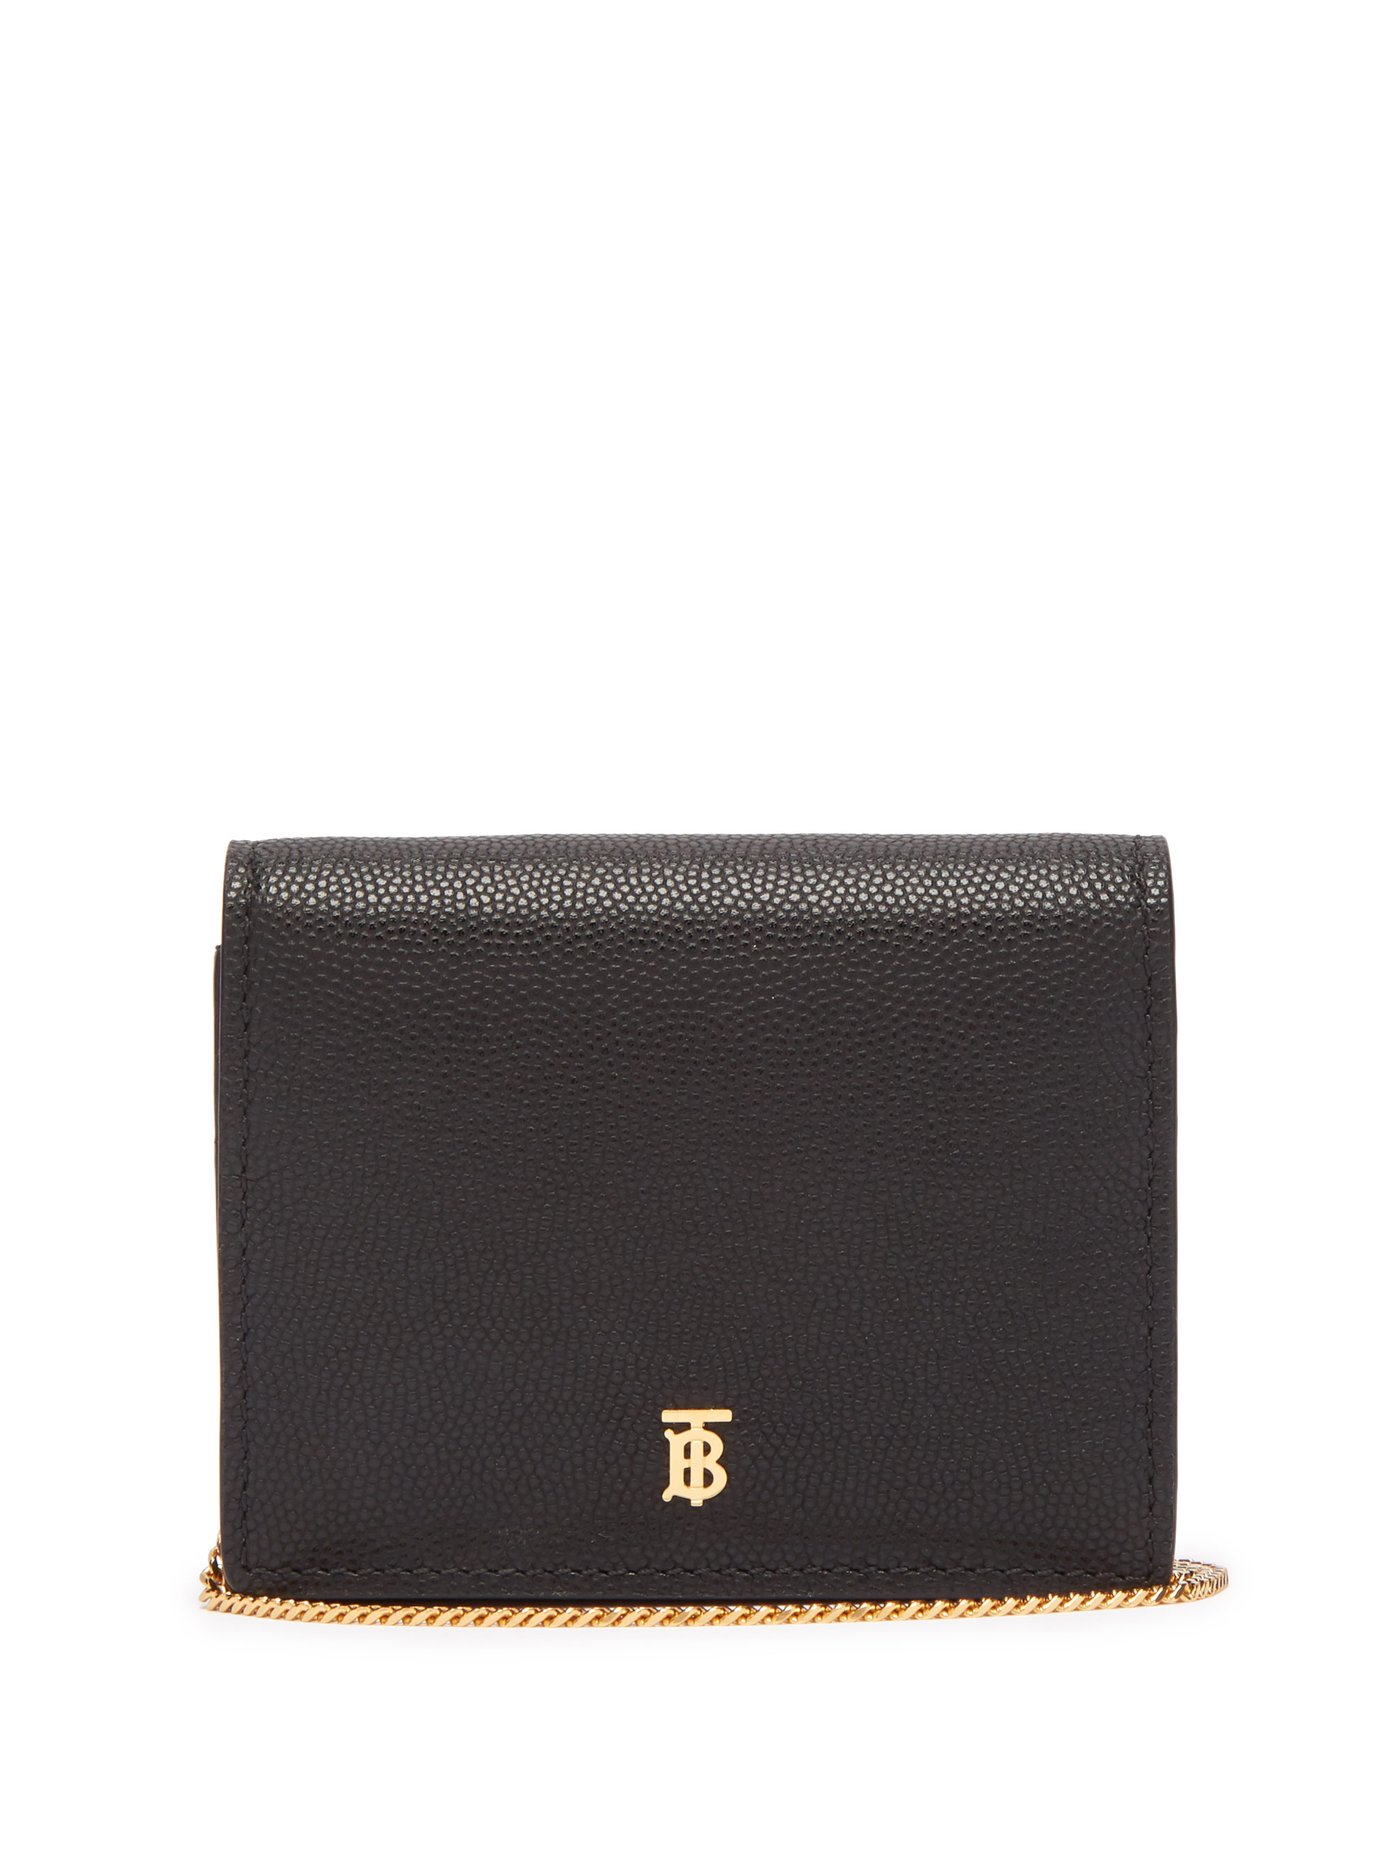 burberry wallet leather